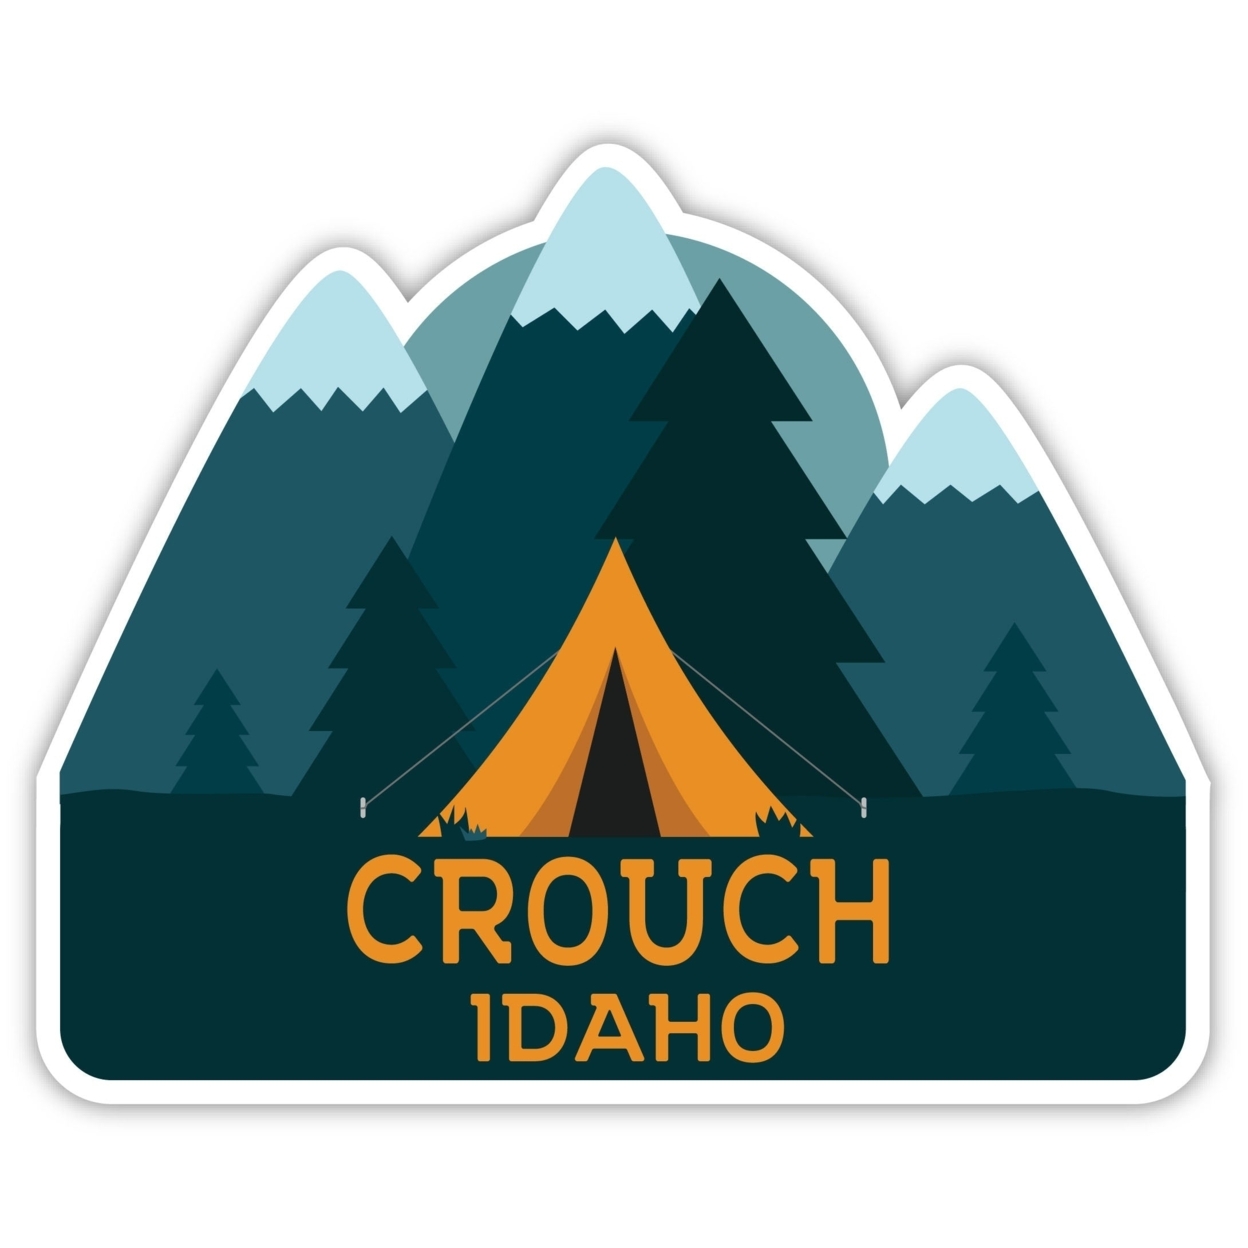 Crouch Idaho Souvenir Decorative Stickers (Choose Theme And Size) - 4-Pack, 8-Inch, Tent